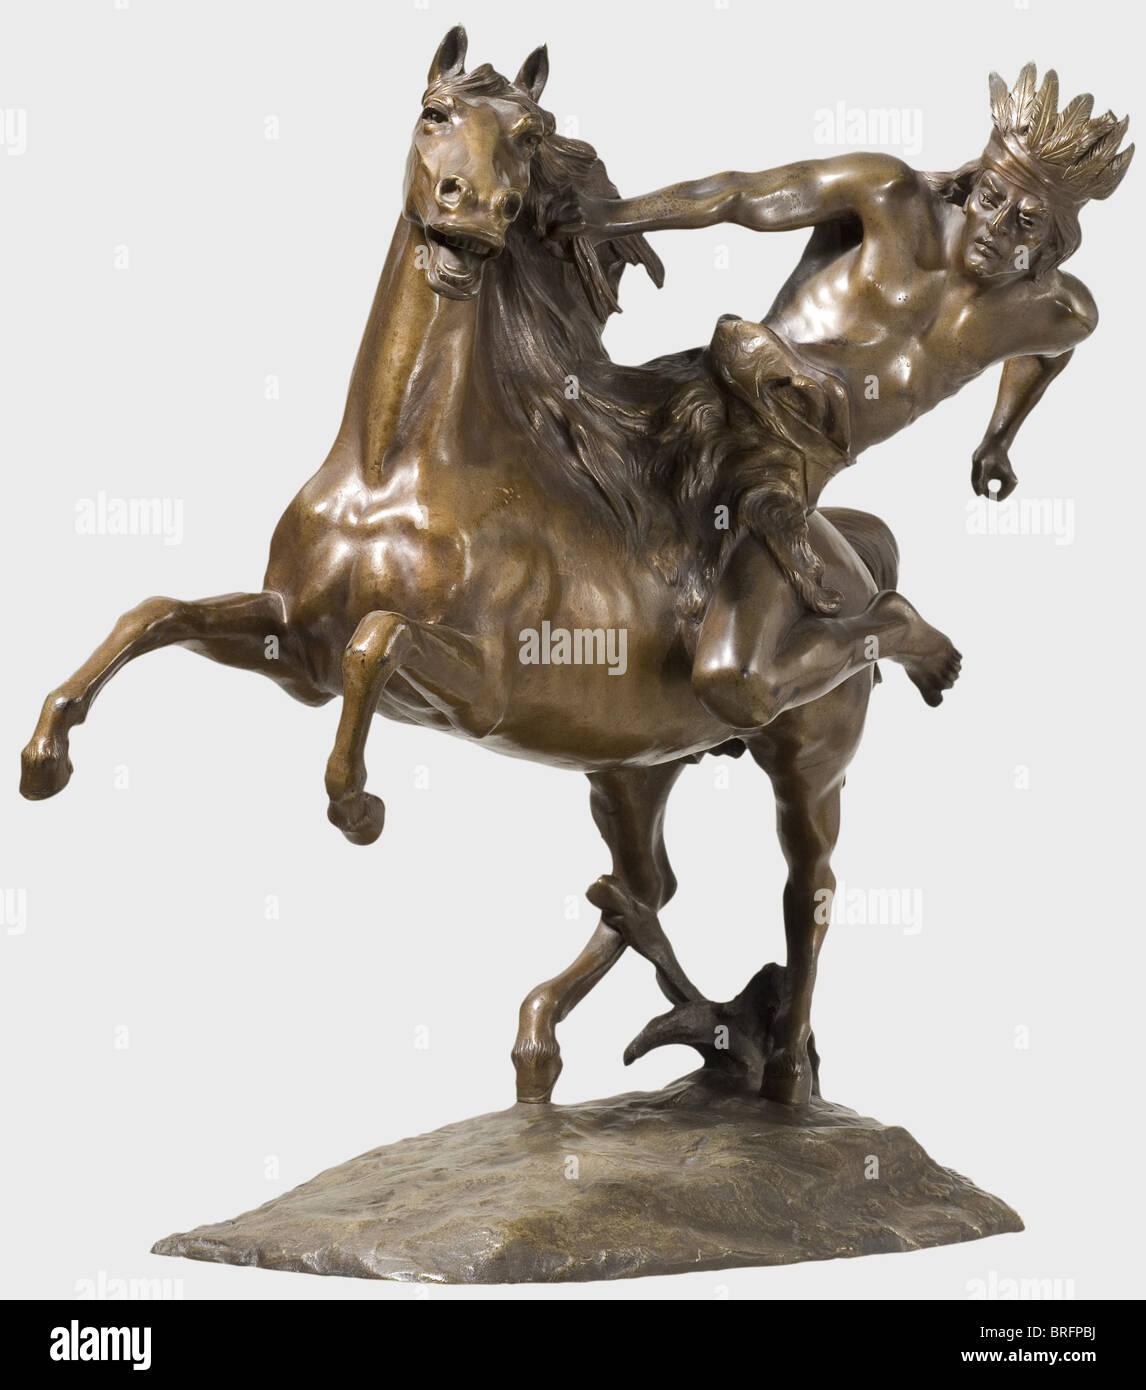 Charles Lemoine (1839 - unknown) - Warrior on Horseback, patinated bronze. Warrior with headdress, the right hand tightly grasping the horse's mane, the left originally holding a spear (now missing). On irregularly shaped base signed 'Lemoine'. Height 43 cm. fine arts, people, 19th century, fine arts, art, statuette, figurine, figurines, statuettes, sculpture, sculptures, object, objects, stills, clipping, clippings, cut out, cut-out, cut-outs, Artist's Copyright has not to be cleared Stock Photo